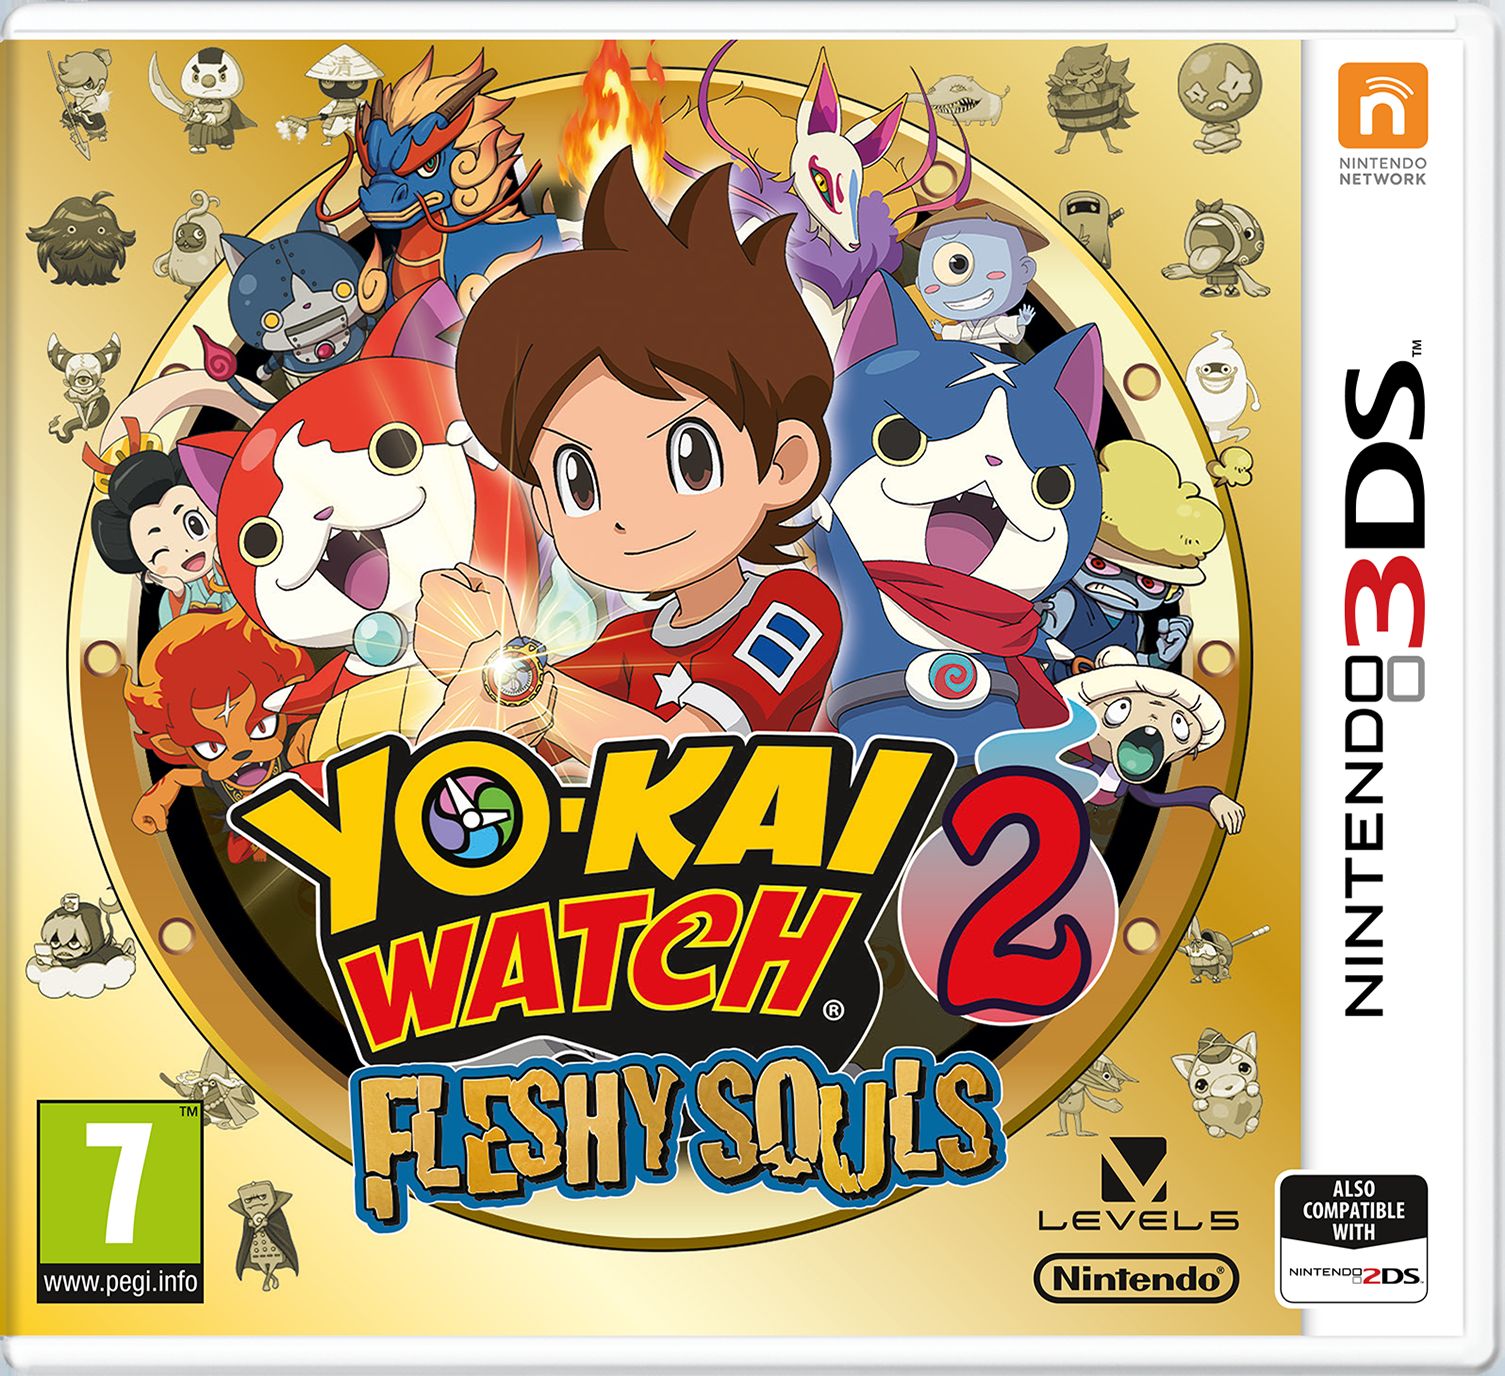 Yo-kai Watch is making another push to take over America 